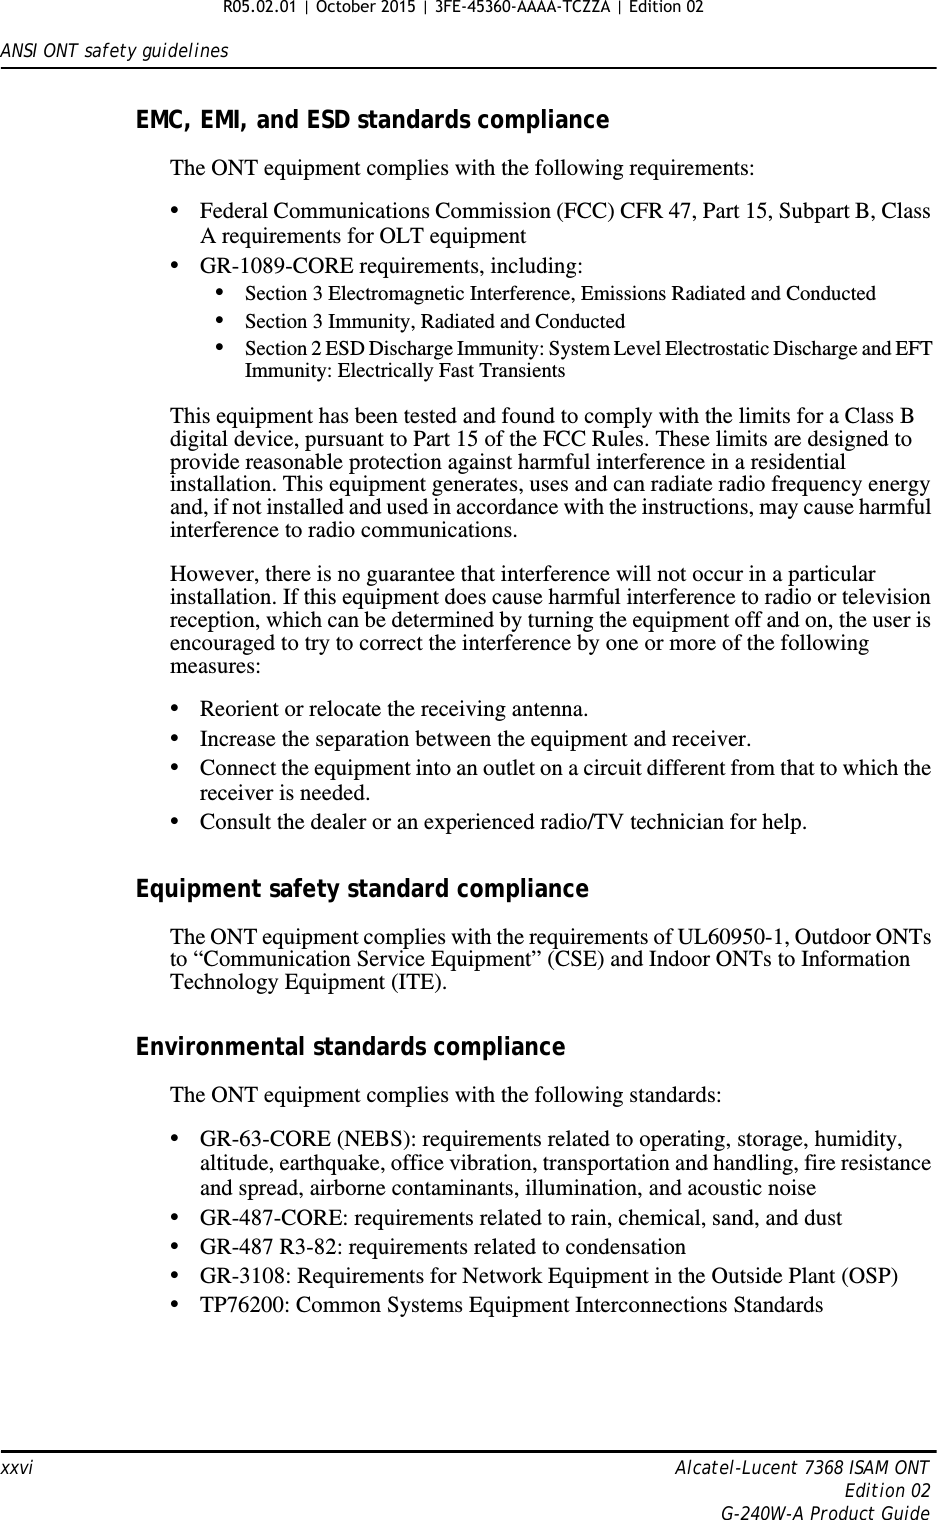 ANSI ONT safety guidelinesxxvi Alcatel-Lucent 7368 ISAM ONTEdition 02G-240W-A Product GuideEMC, EMI, and ESD standards complianceThe ONT equipment complies with the following requirements:•Federal Communications Commission (FCC) CFR 47, Part 15, Subpart B, Class A requirements for OLT equipment•GR-1089-CORE requirements, including:•Section 3 Electromagnetic Interference, Emissions Radiated and Conducted•Section 3 Immunity, Radiated and Conducted•Section 2 ESD Discharge Immunity: System Level Electrostatic Discharge and EFT Immunity: Electrically Fast TransientsThis equipment has been tested and found to comply with the limits for a Class B digital device, pursuant to Part 15 of the FCC Rules. These limits are designed to provide reasonable protection against harmful interference in a residential installation. This equipment generates, uses and can radiate radio frequency energy and, if not installed and used in accordance with the instructions, may cause harmful interference to radio communications.However, there is no guarantee that interference will not occur in a particular installation. If this equipment does cause harmful interference to radio or television reception, which can be determined by turning the equipment off and on, the user is encouraged to try to correct the interference by one or more of the following measures:•Reorient or relocate the receiving antenna.•Increase the separation between the equipment and receiver.•Connect the equipment into an outlet on a circuit different from that to which the receiver is needed.•Consult the dealer or an experienced radio/TV technician for help.Equipment safety standard complianceThe ONT equipment complies with the requirements of UL60950-1, Outdoor ONTs to “Communication Service Equipment” (CSE) and Indoor ONTs to Information Technology Equipment (ITE).Environmental standards complianceThe ONT equipment complies with the following standards:•GR-63-CORE (NEBS): requirements related to operating, storage, humidity, altitude, earthquake, office vibration, transportation and handling, fire resistance and spread, airborne contaminants, illumination, and acoustic noise•GR-487-CORE: requirements related to rain, chemical, sand, and dust•GR-487 R3-82: requirements related to condensation •GR-3108: Requirements for Network Equipment in the Outside Plant (OSP)•TP76200: Common Systems Equipment Interconnections Standards R05.02.01 | October 2015 | 3FE-45360-AAAA-TCZZA | Edition 02 